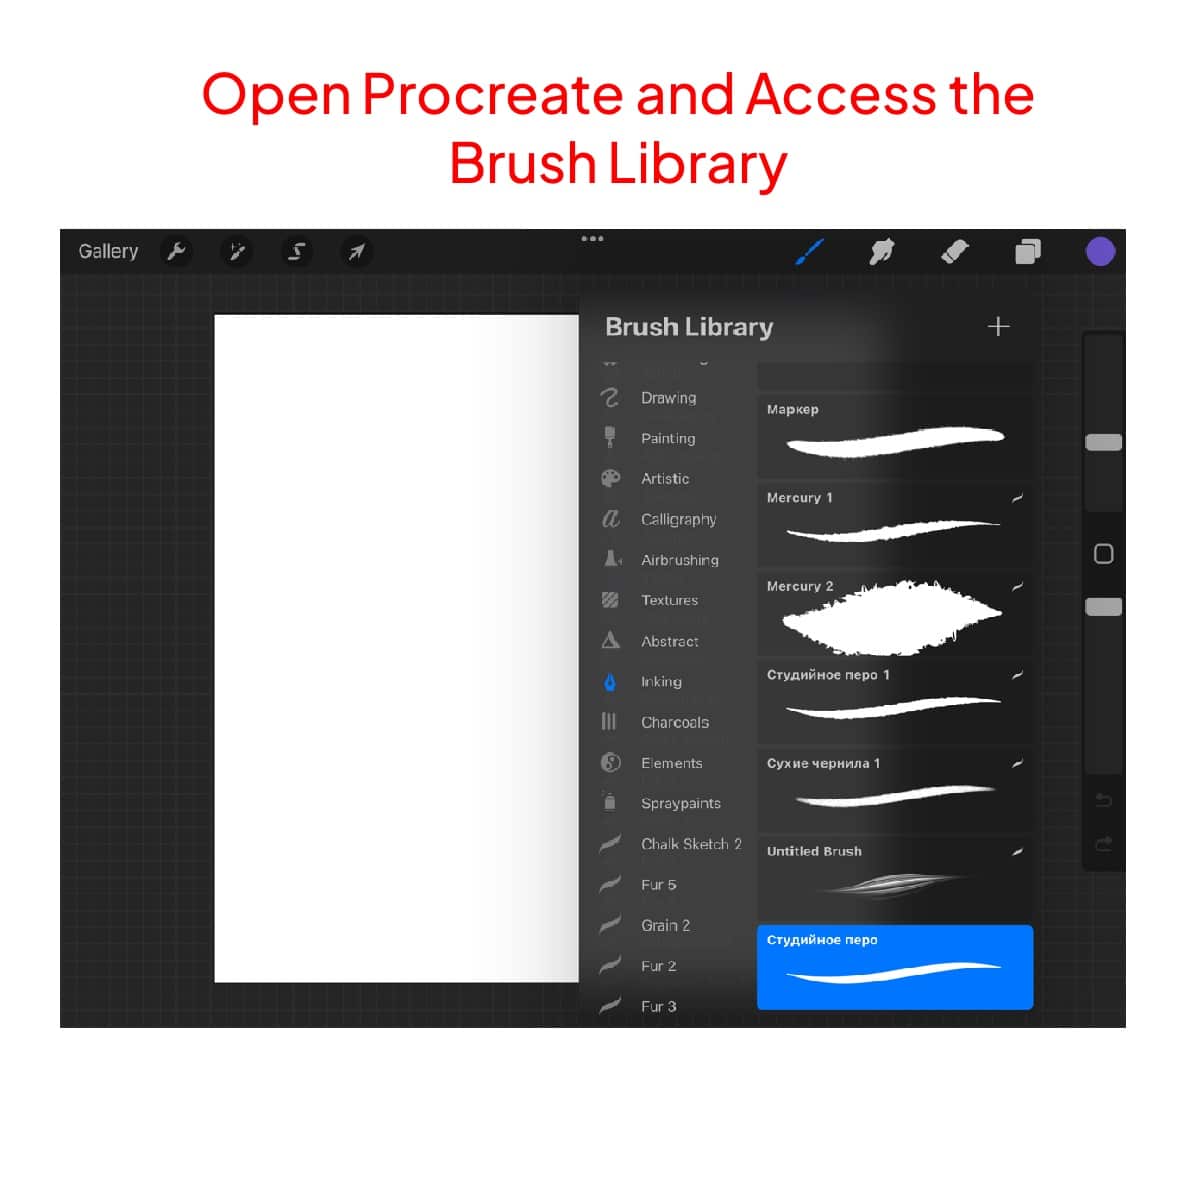 Accessing the brush library